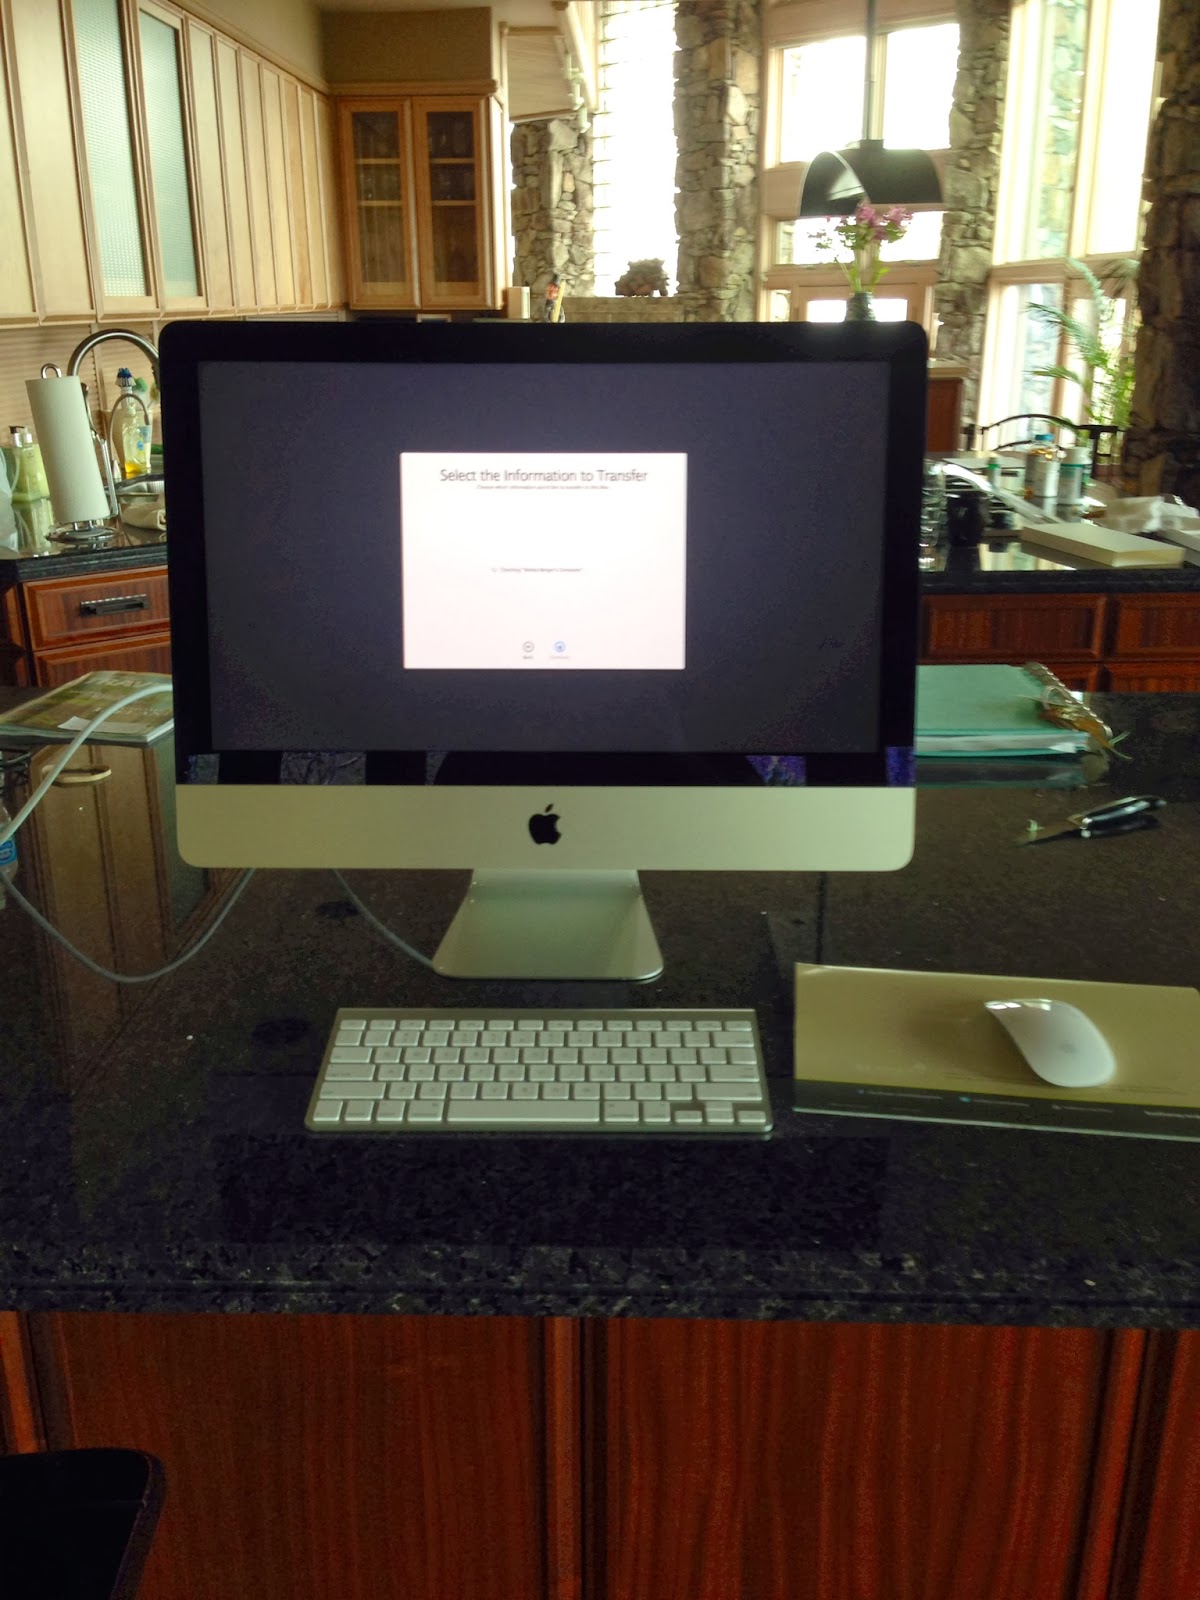 Migrating Your Old Macbook to Your New iMac